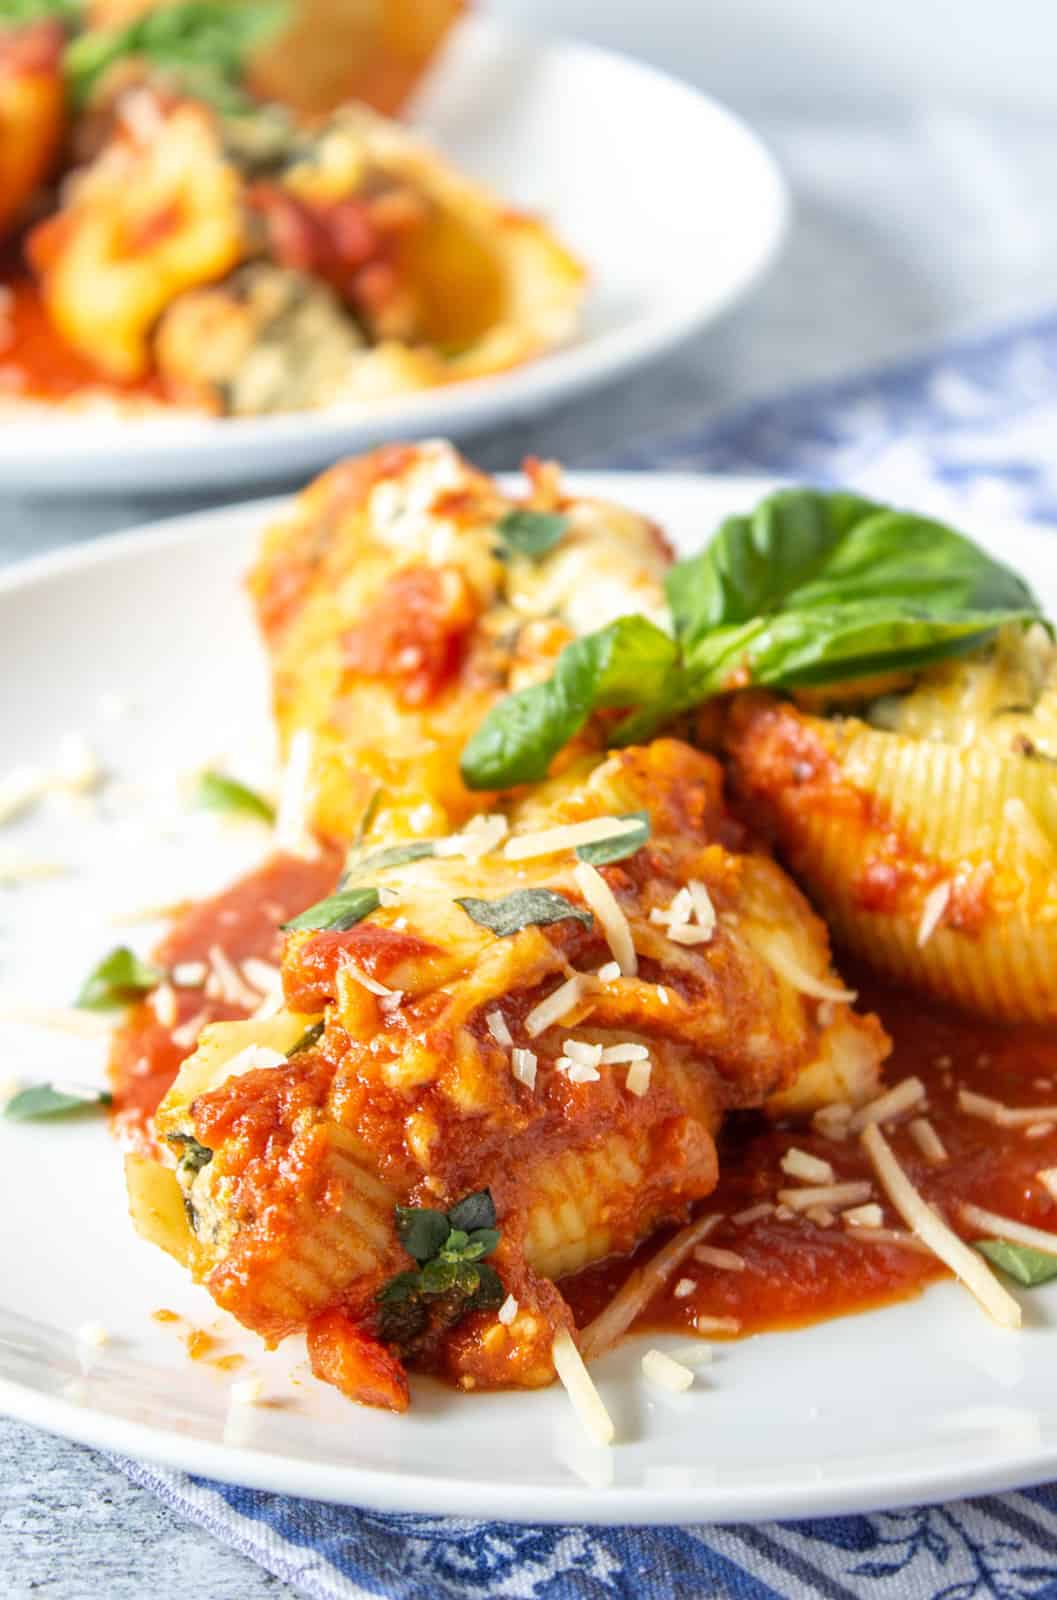 Spinach stuffed shells on a plate with marinara sauce and topped with fresh basil.